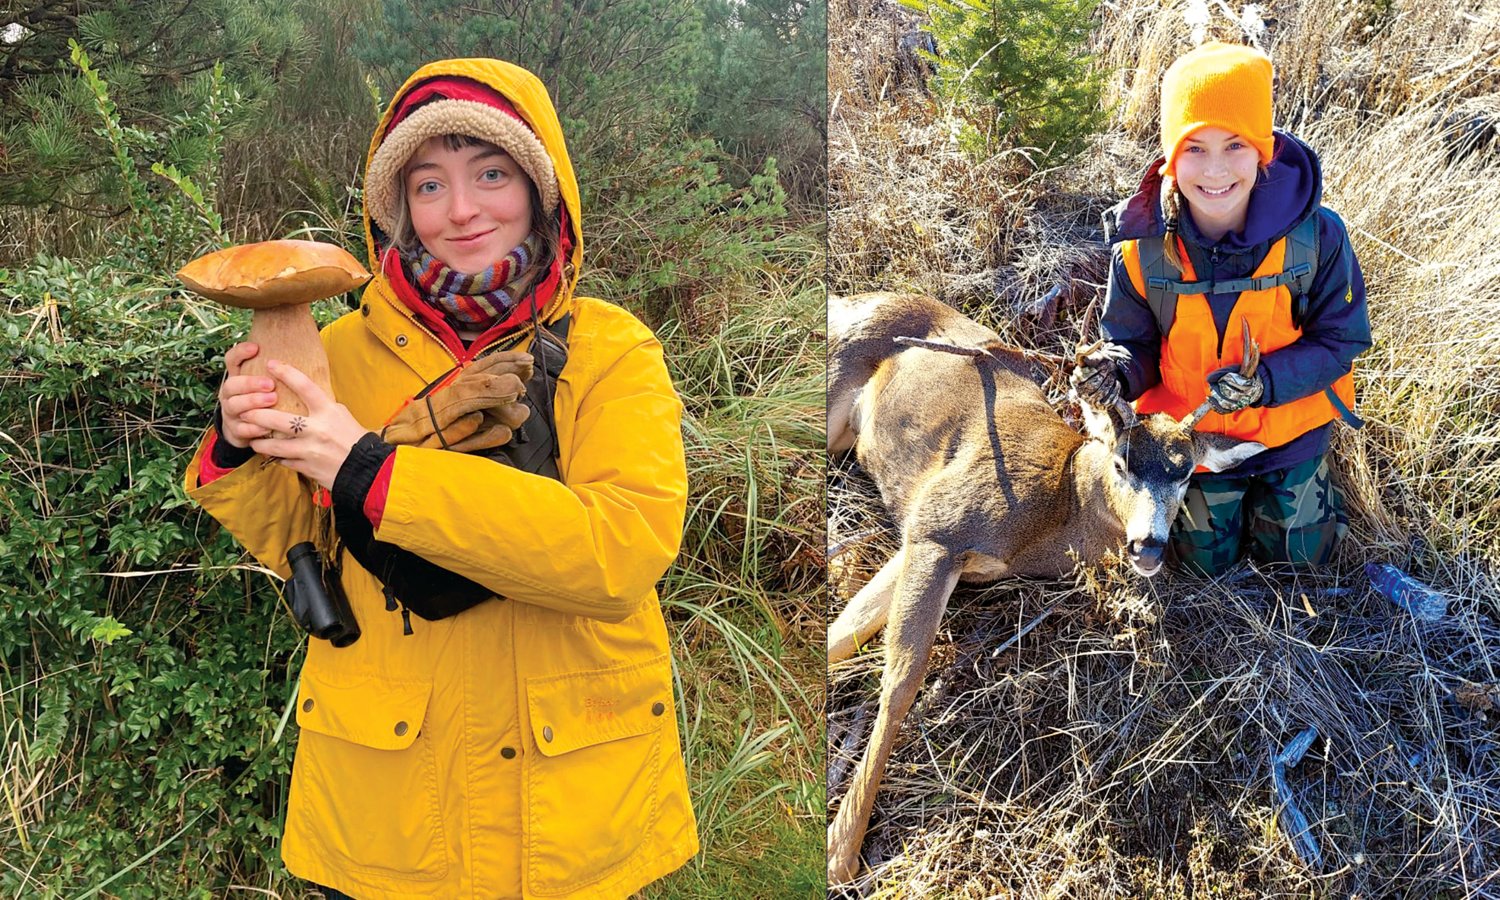 Left: "I've been enjoying your hunting highlights section. While I don't hunt animals, I do hunt for mushrooms. Last weekend we took our friend Mariana Sanborn mushroom hunting locally and she found this very large Porcini mushroom." — submitted by Ben Kunesh.
Right: “Jenna Gallagher, 13, is pictured after she harvested her first buck ever on the opening day of late buck season. The three-point buck was harvested near Mount St. Helens after only a few hours out hunting this morning. Definitely a father and daughter moment they'll treasure for a lifetime!” — submitted by Sherri Gallagher